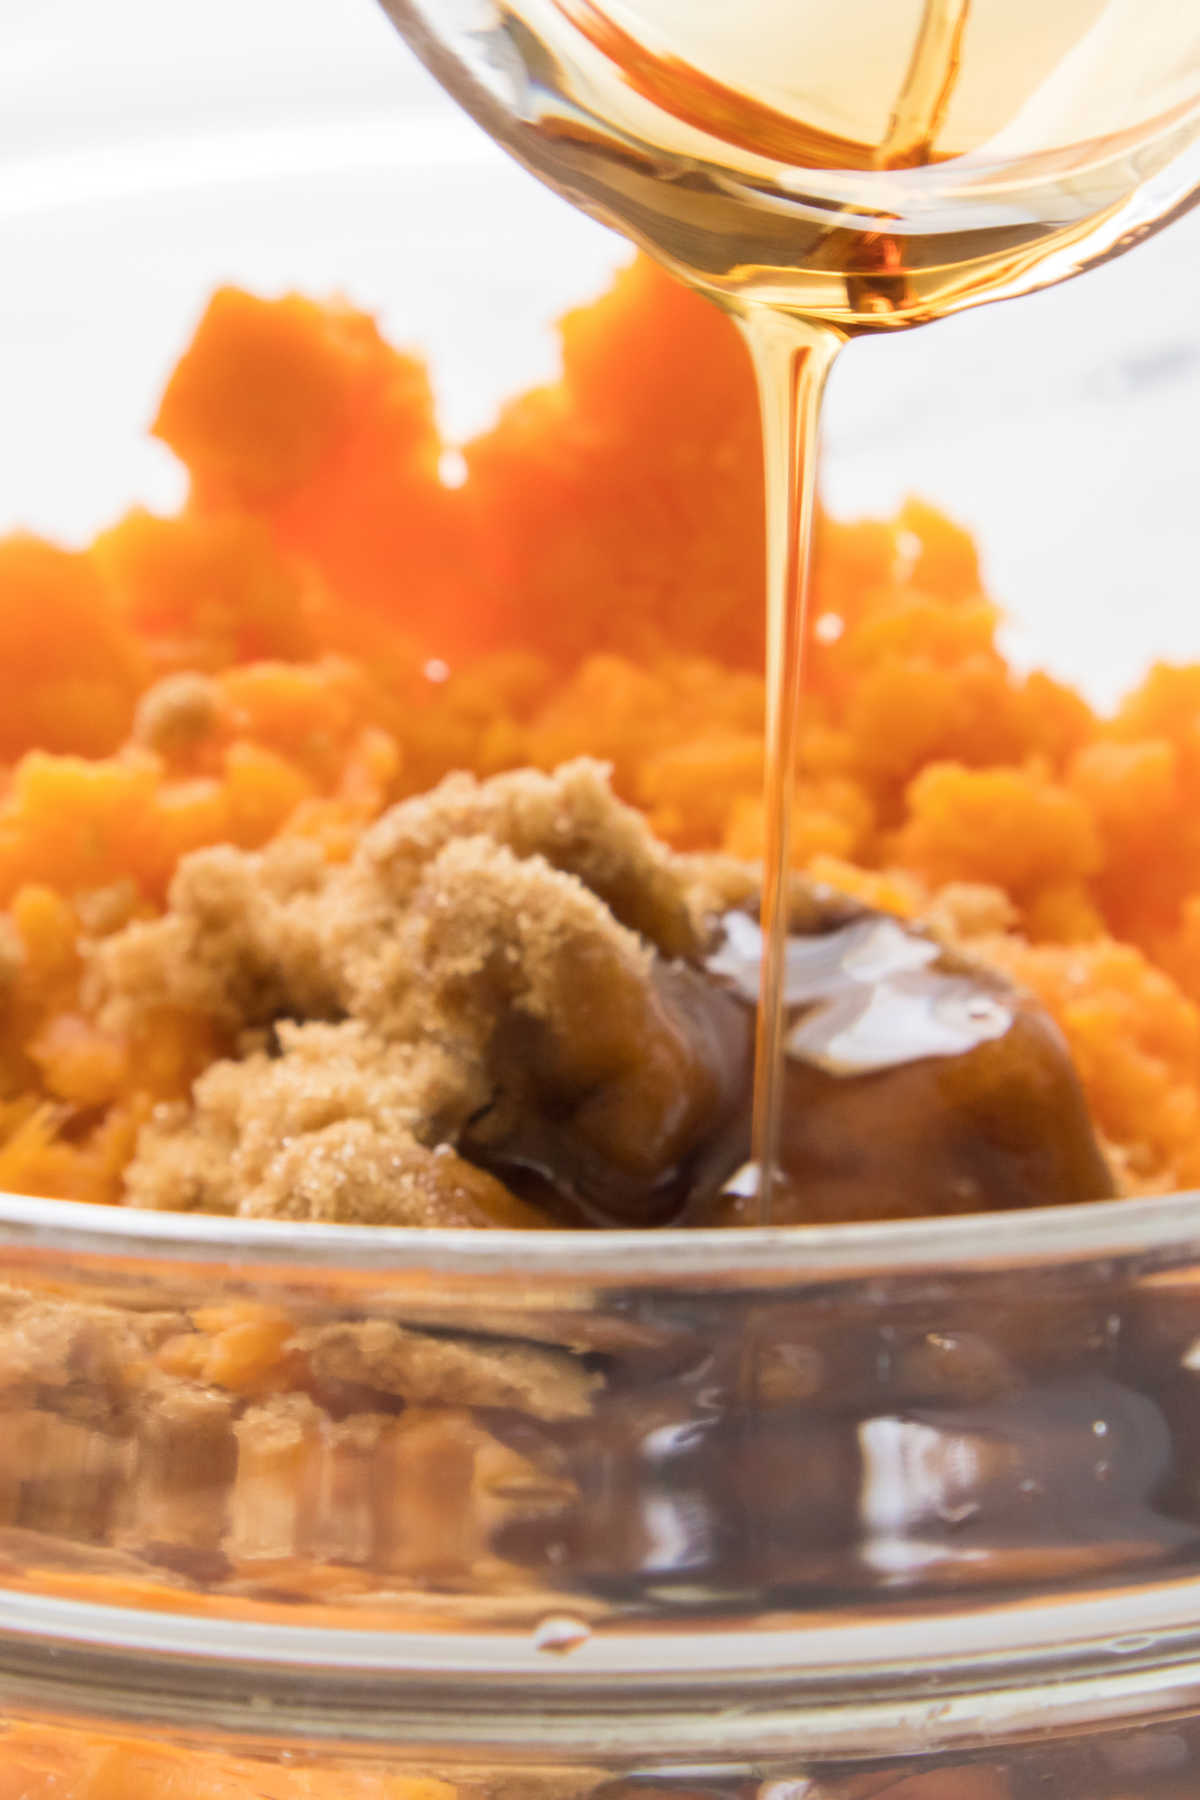 Pouring maple syrup into mashed sweet potatoes.